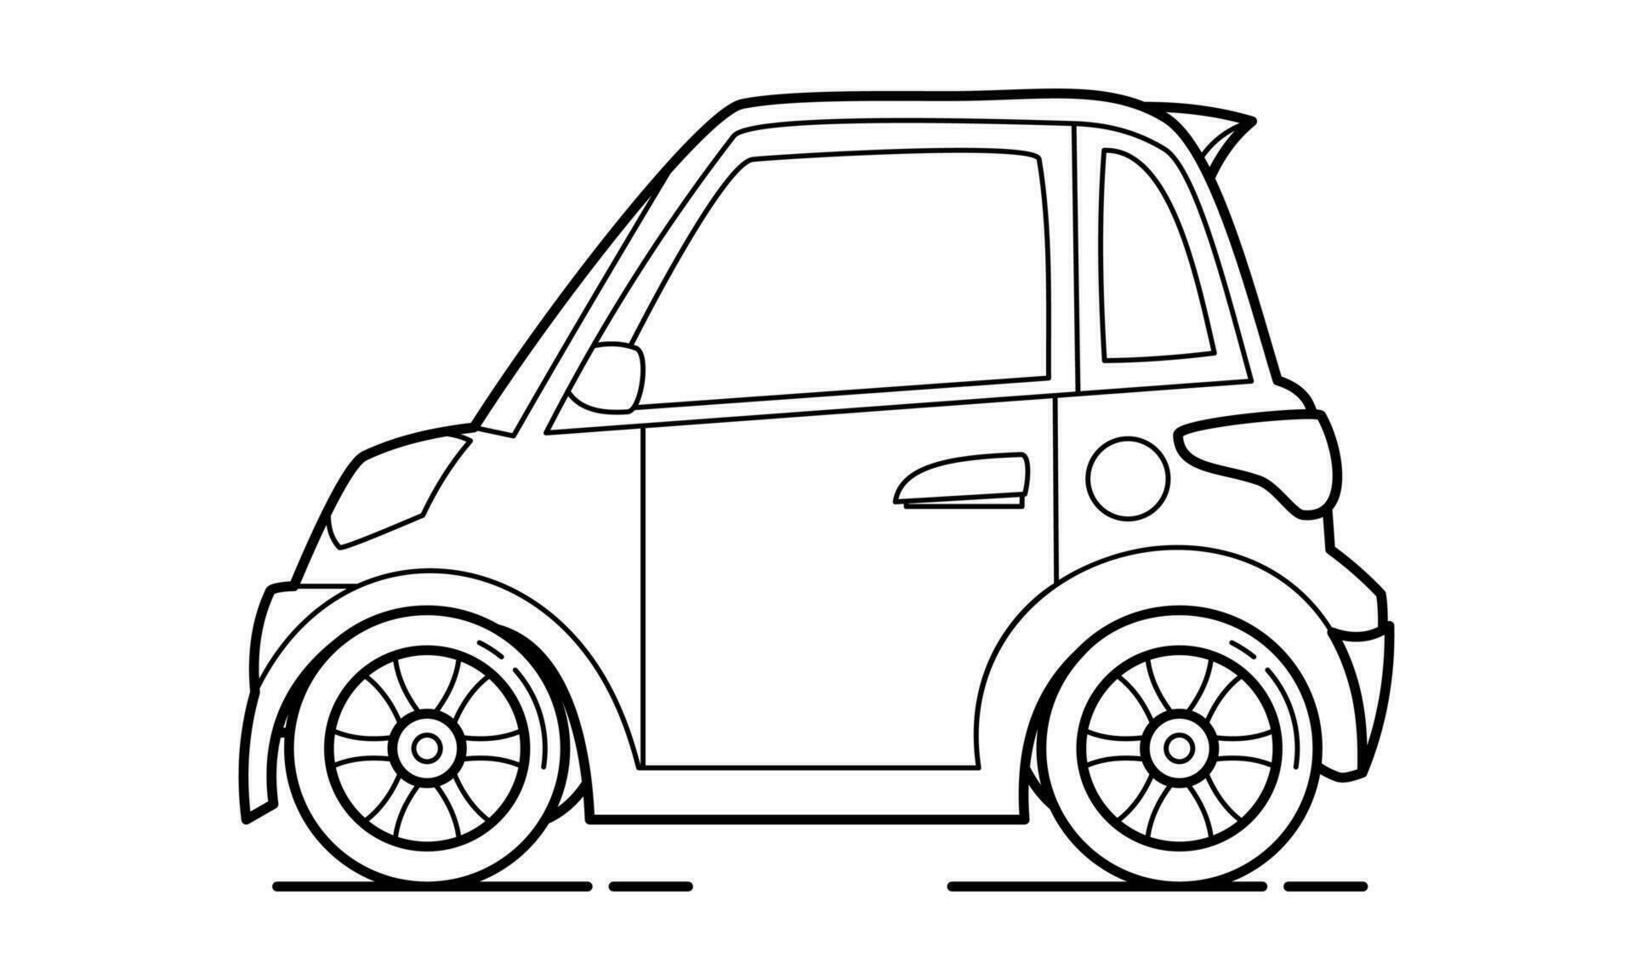 Daily Car Outline Design for Drawing Book vector